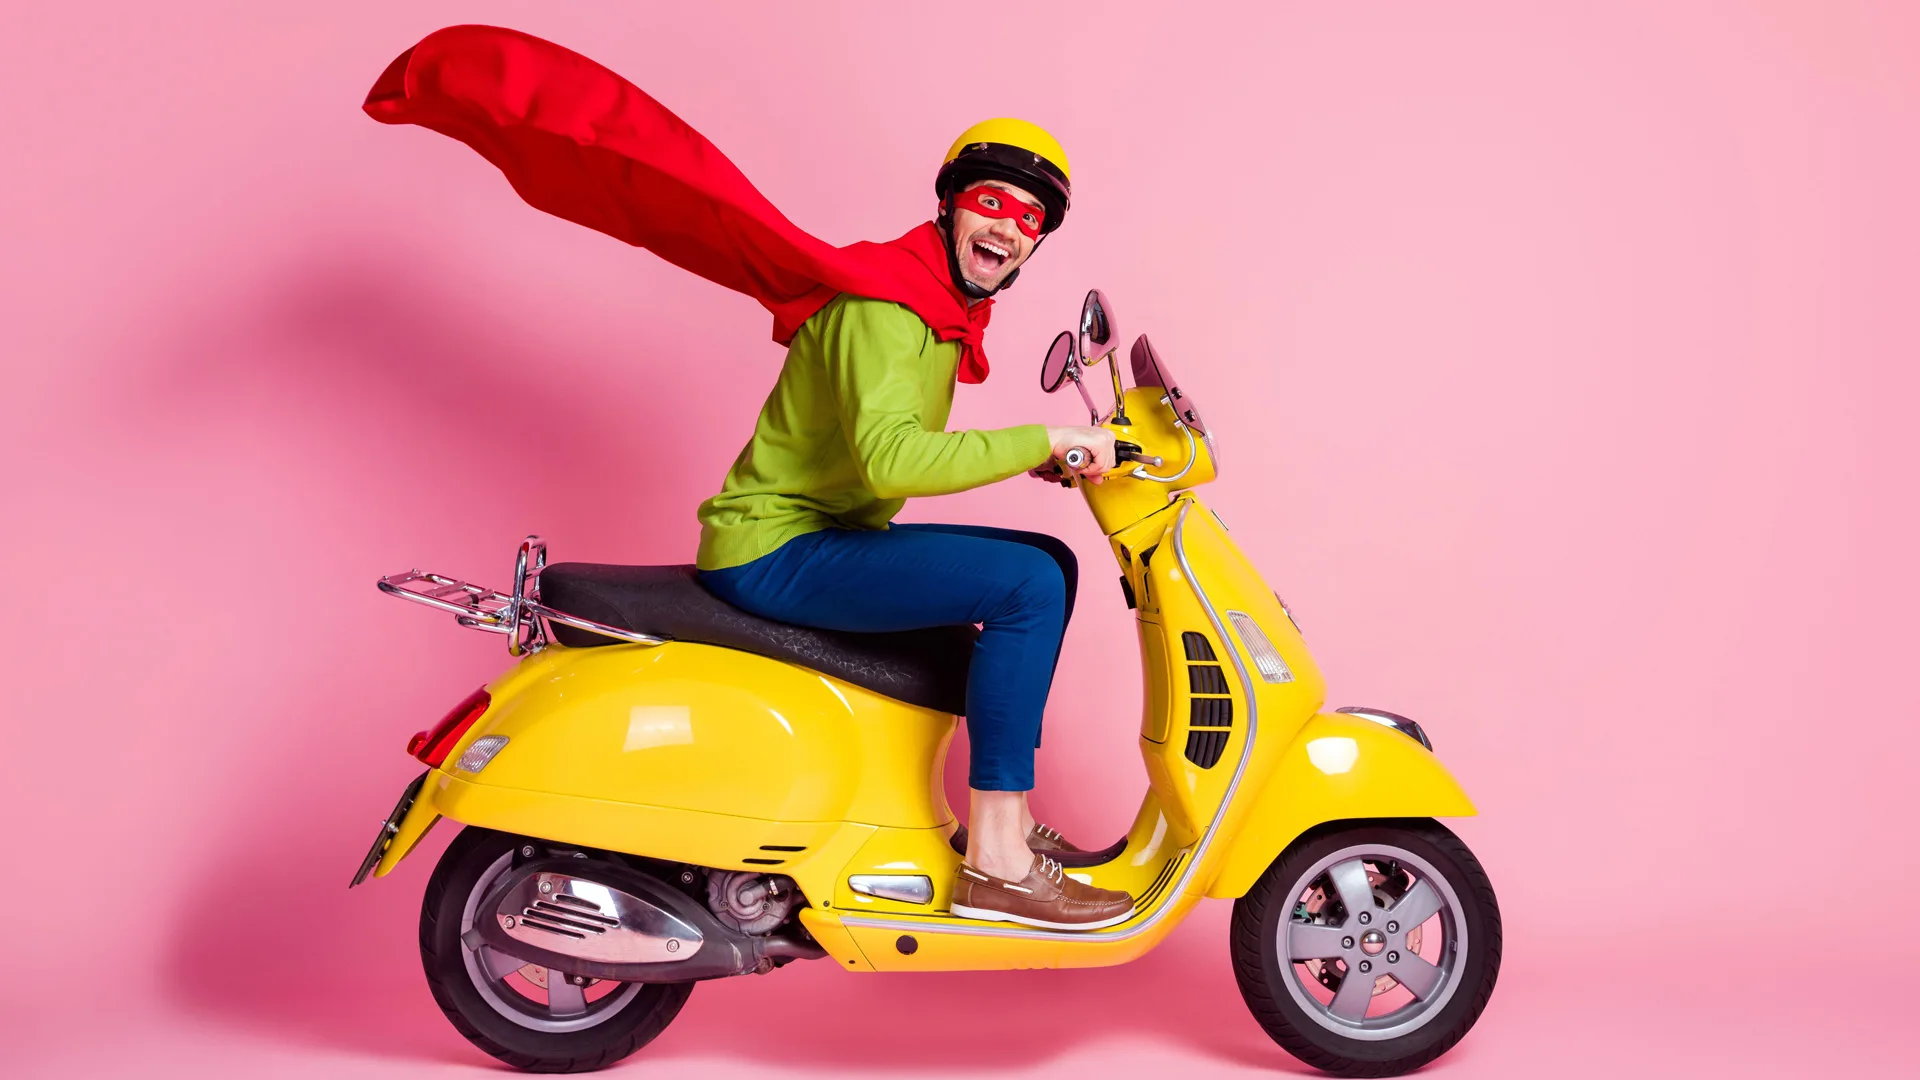 A photograph of a man dressed as a superhero with a red cape and mask riding on a yellow scooter